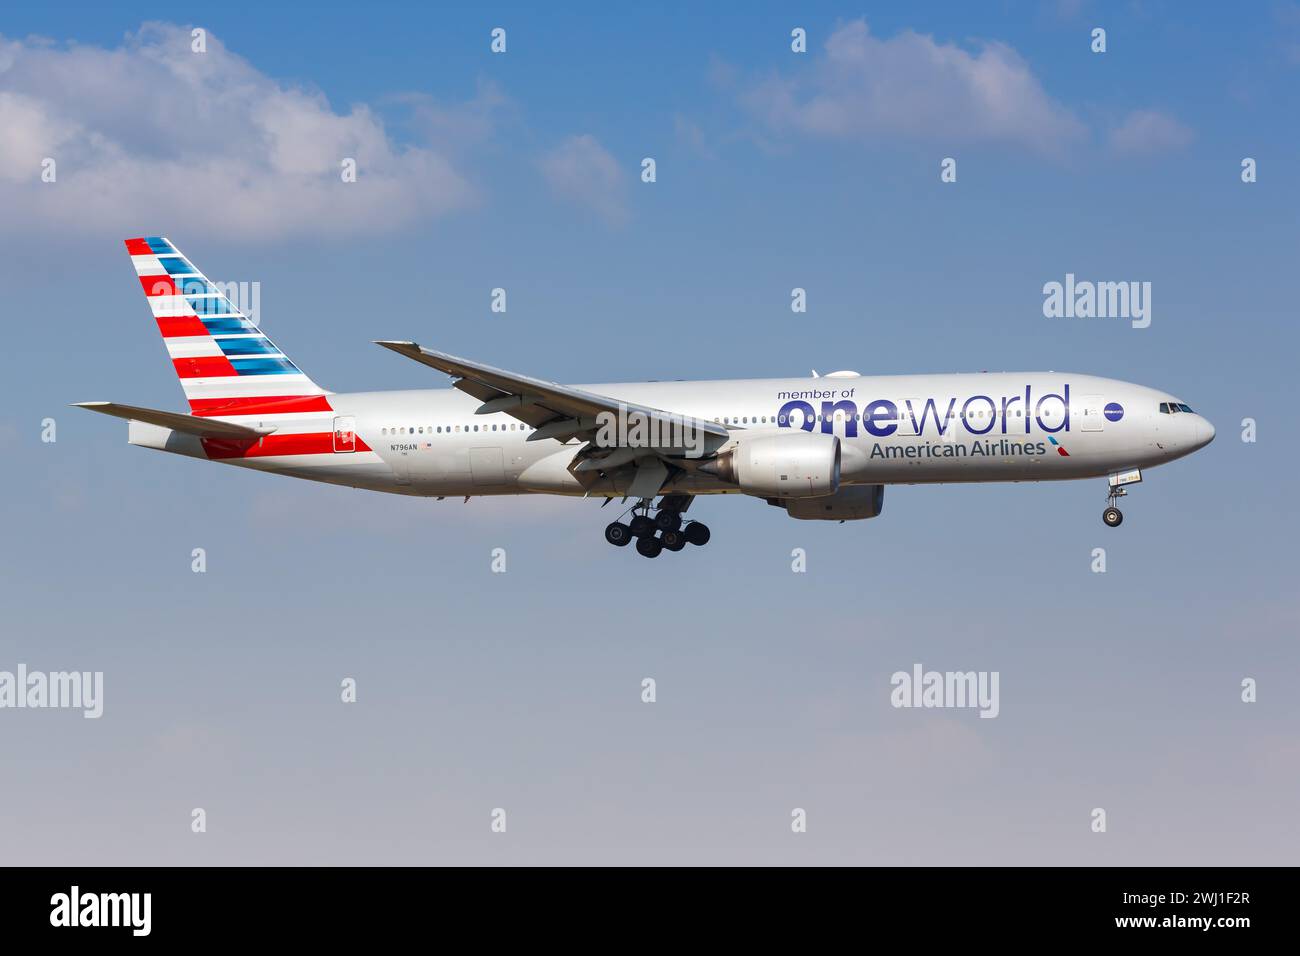 American Airlines Boeing 777-200ER aircraft OneWorld special livery Dallas Fort Worth Airport in the USA Stock Photo